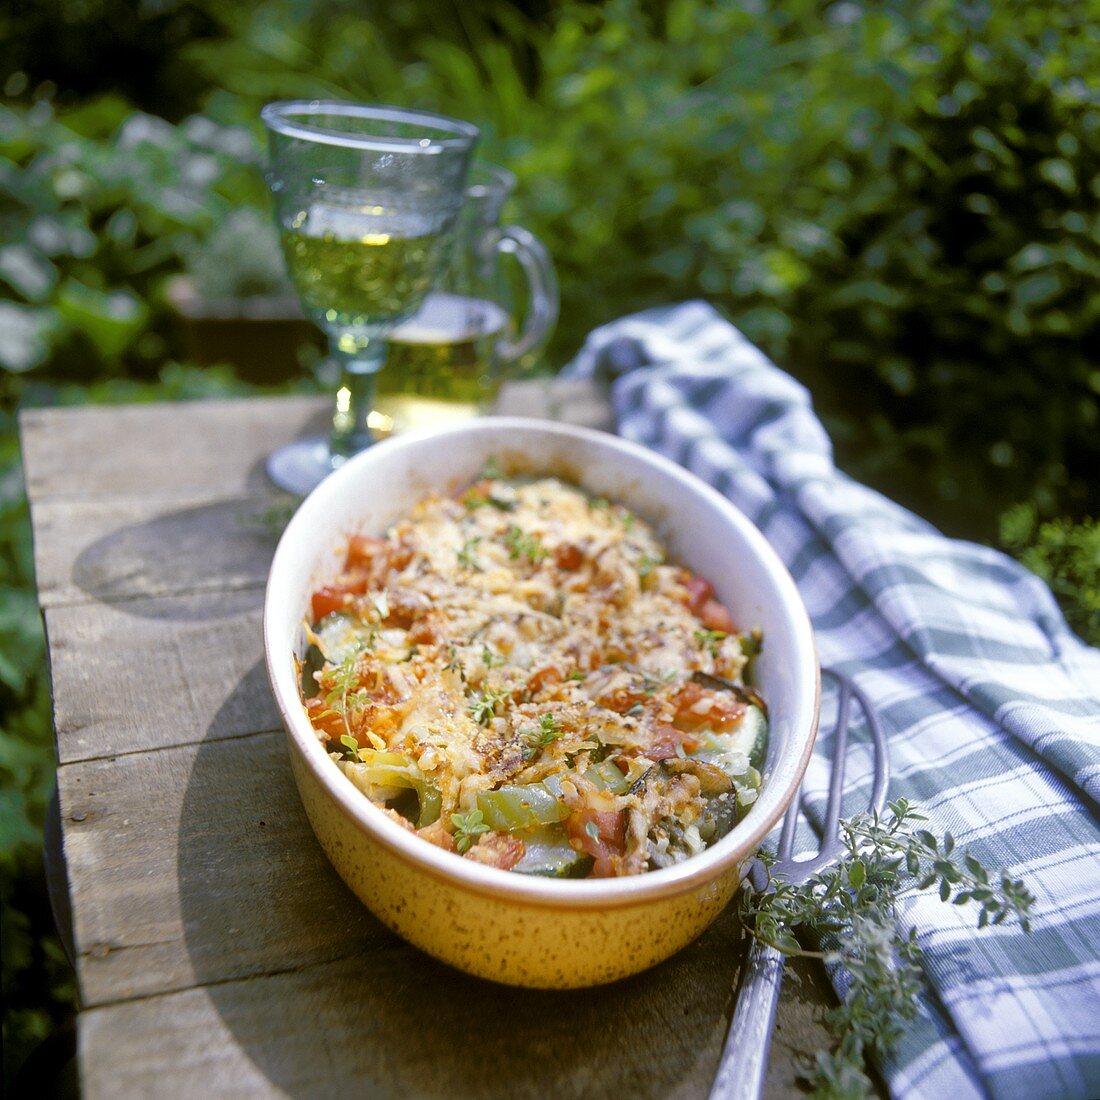 Provencal vegetable casserole with almond & cheese topping